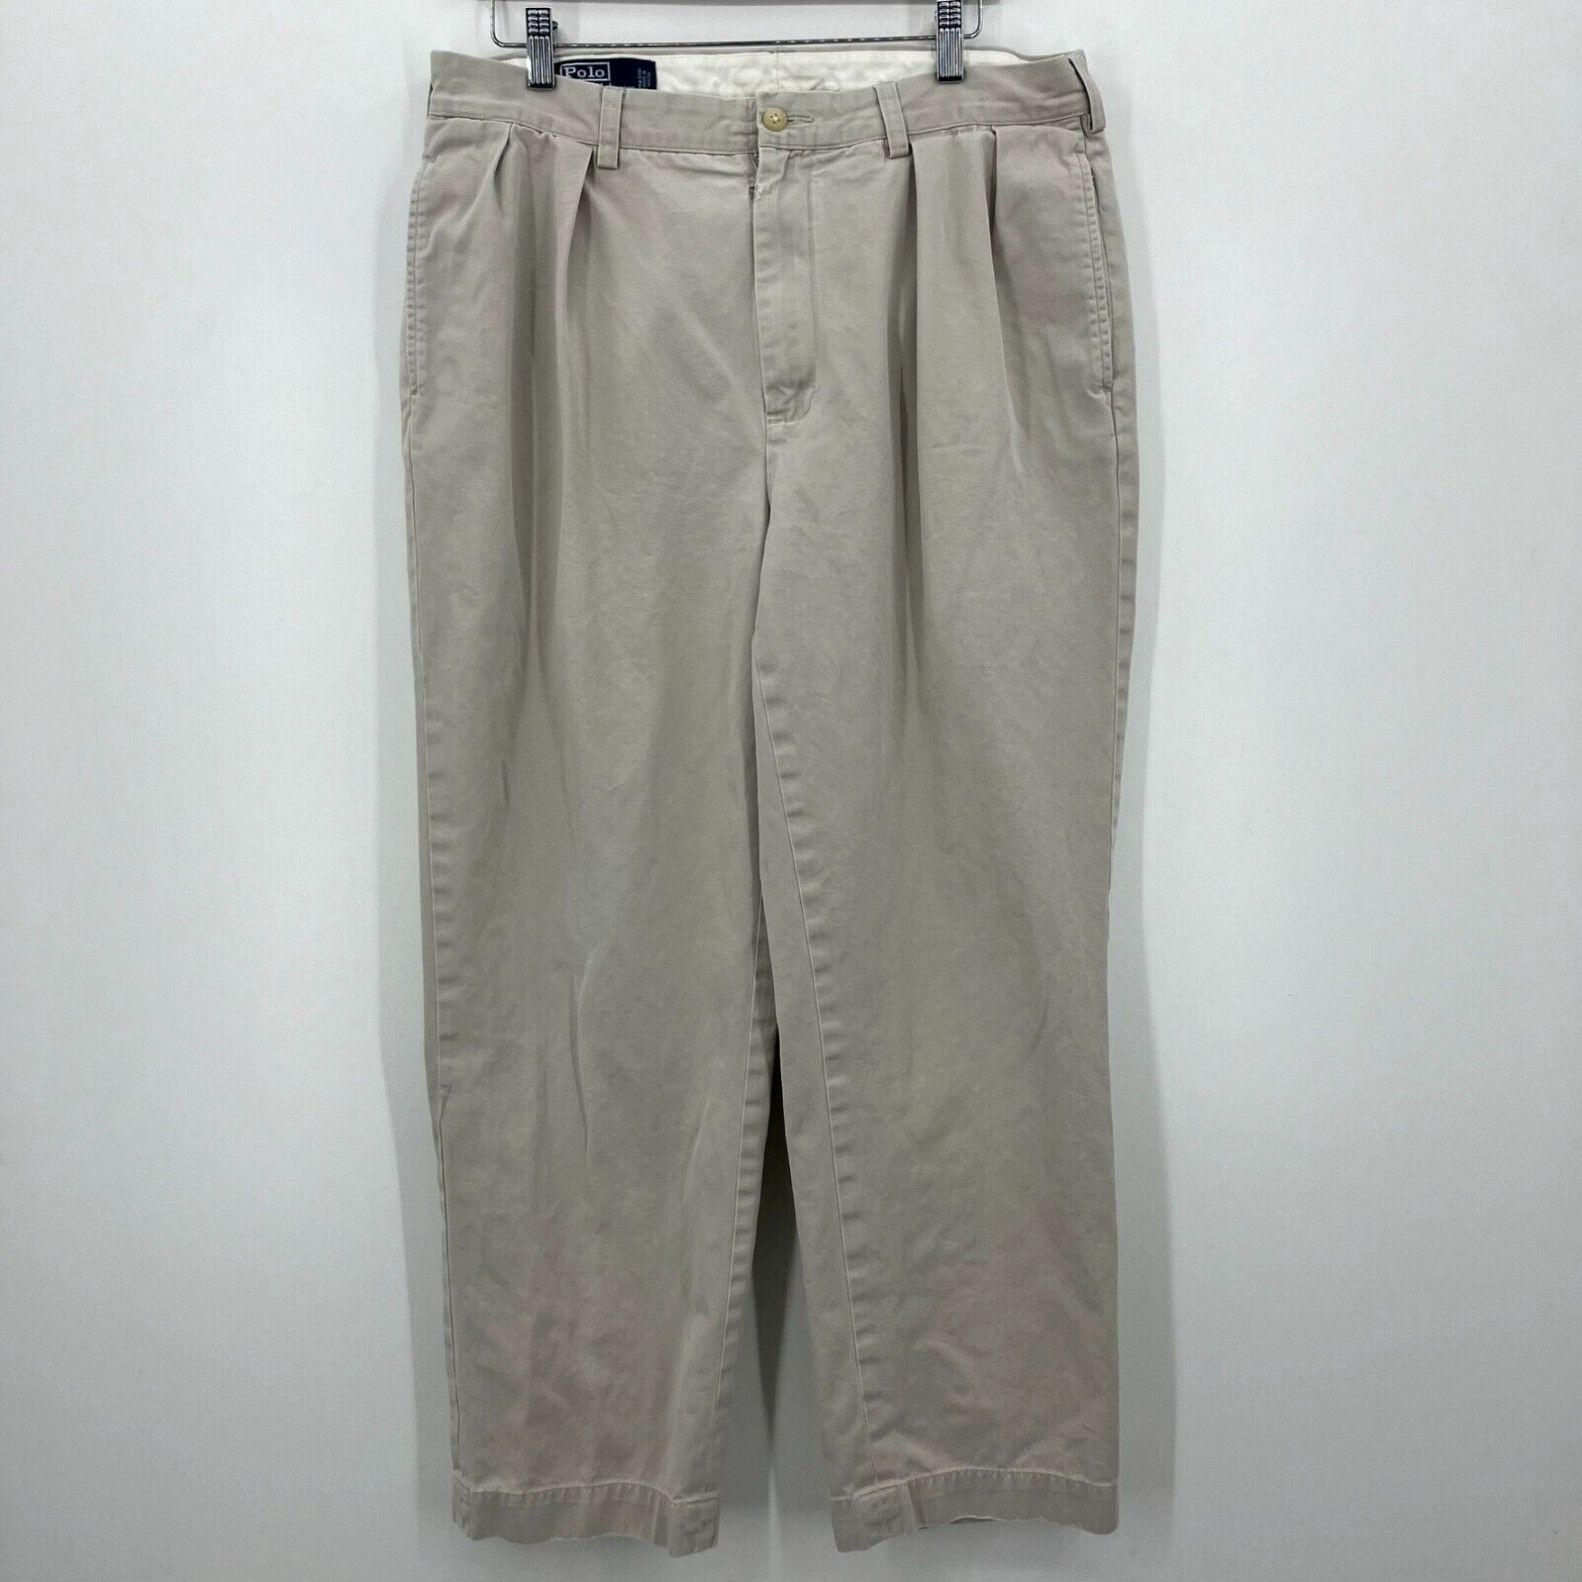 Polo Chino Ralph Lauren Mens Shorts Size 40 (36) Beige Pleated